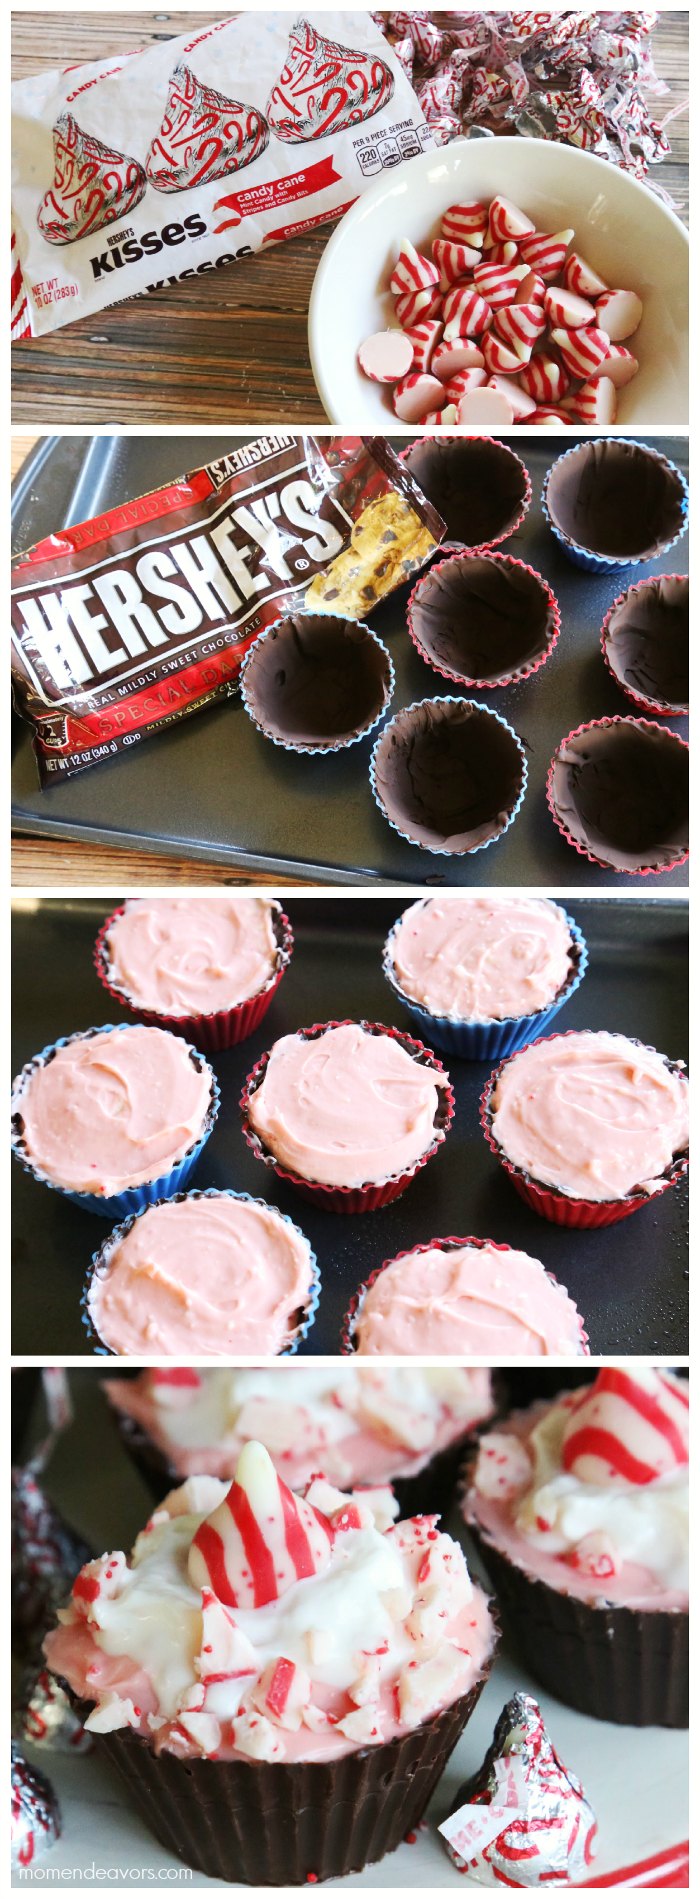 Hershey's Peppermint Cheesecakes